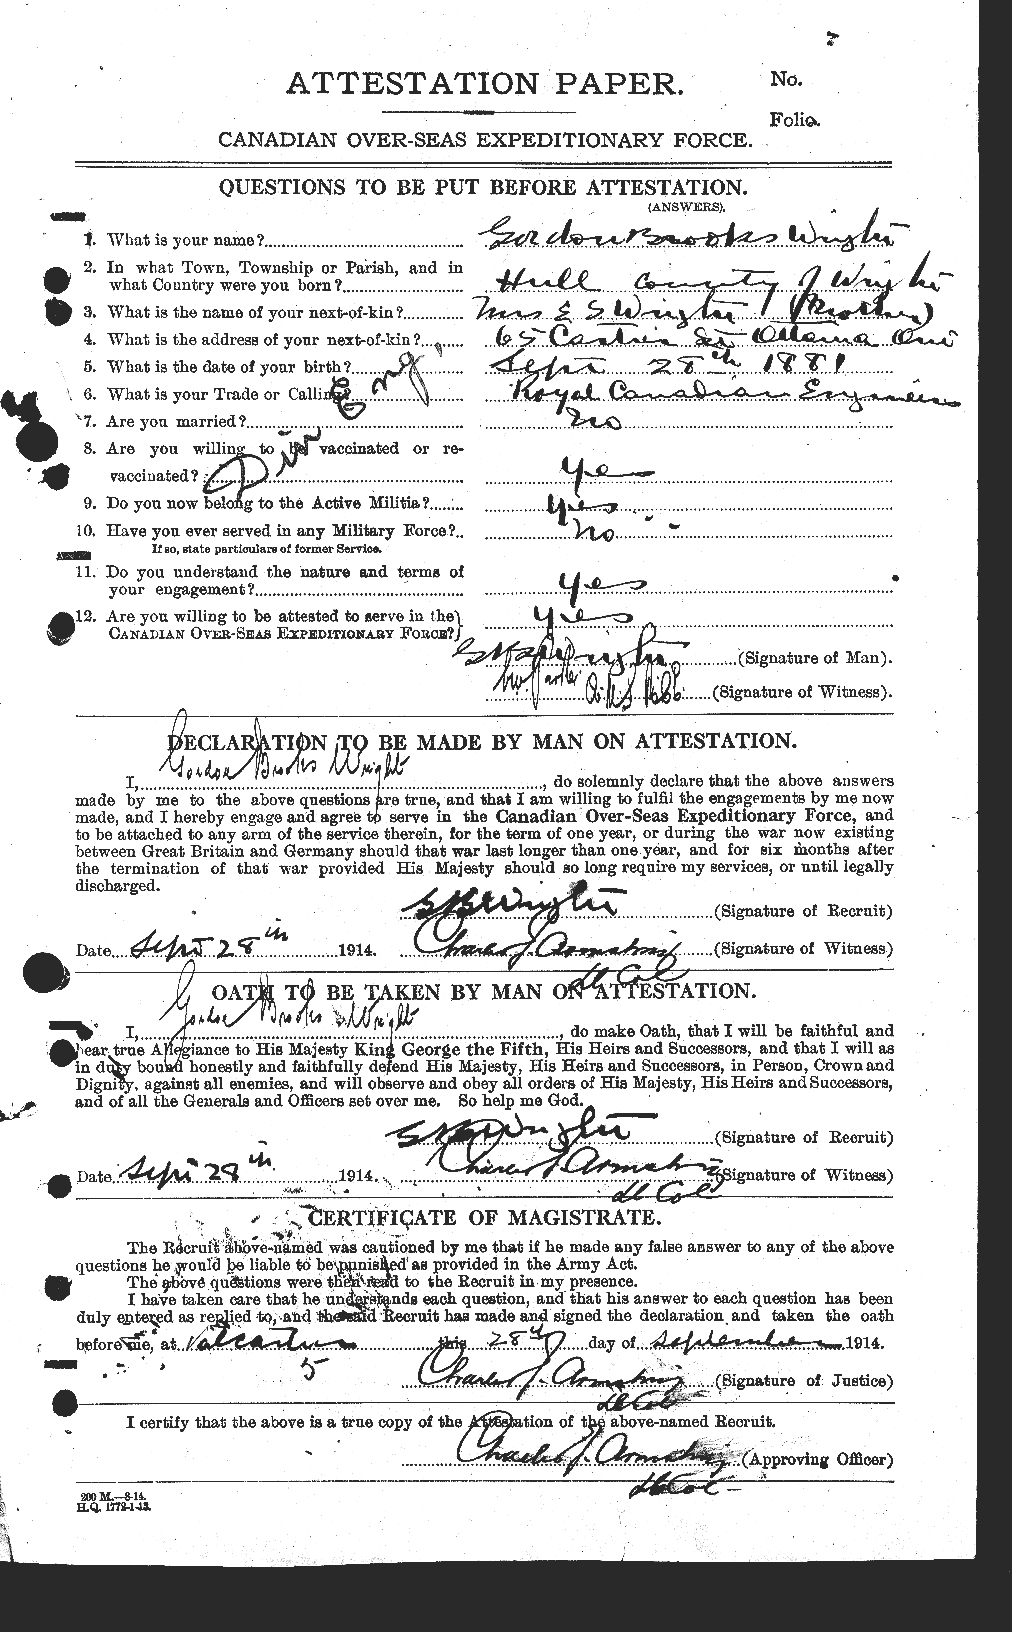 Personnel Records of the First World War - CEF 684060a